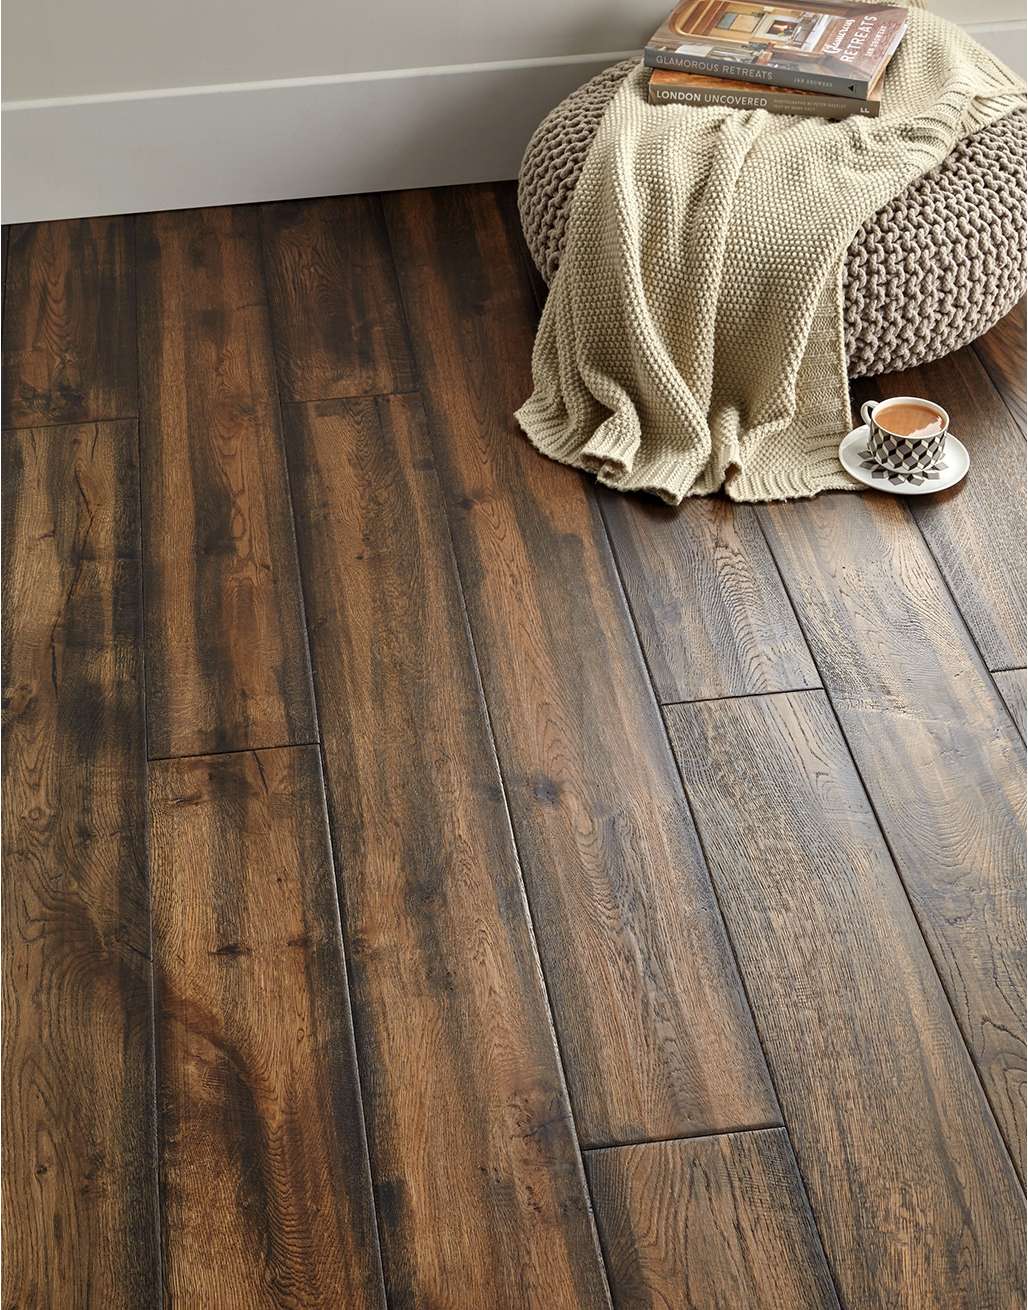 Global Wood Flooring Market: Industry Analysis and Forecast (2018-2026)